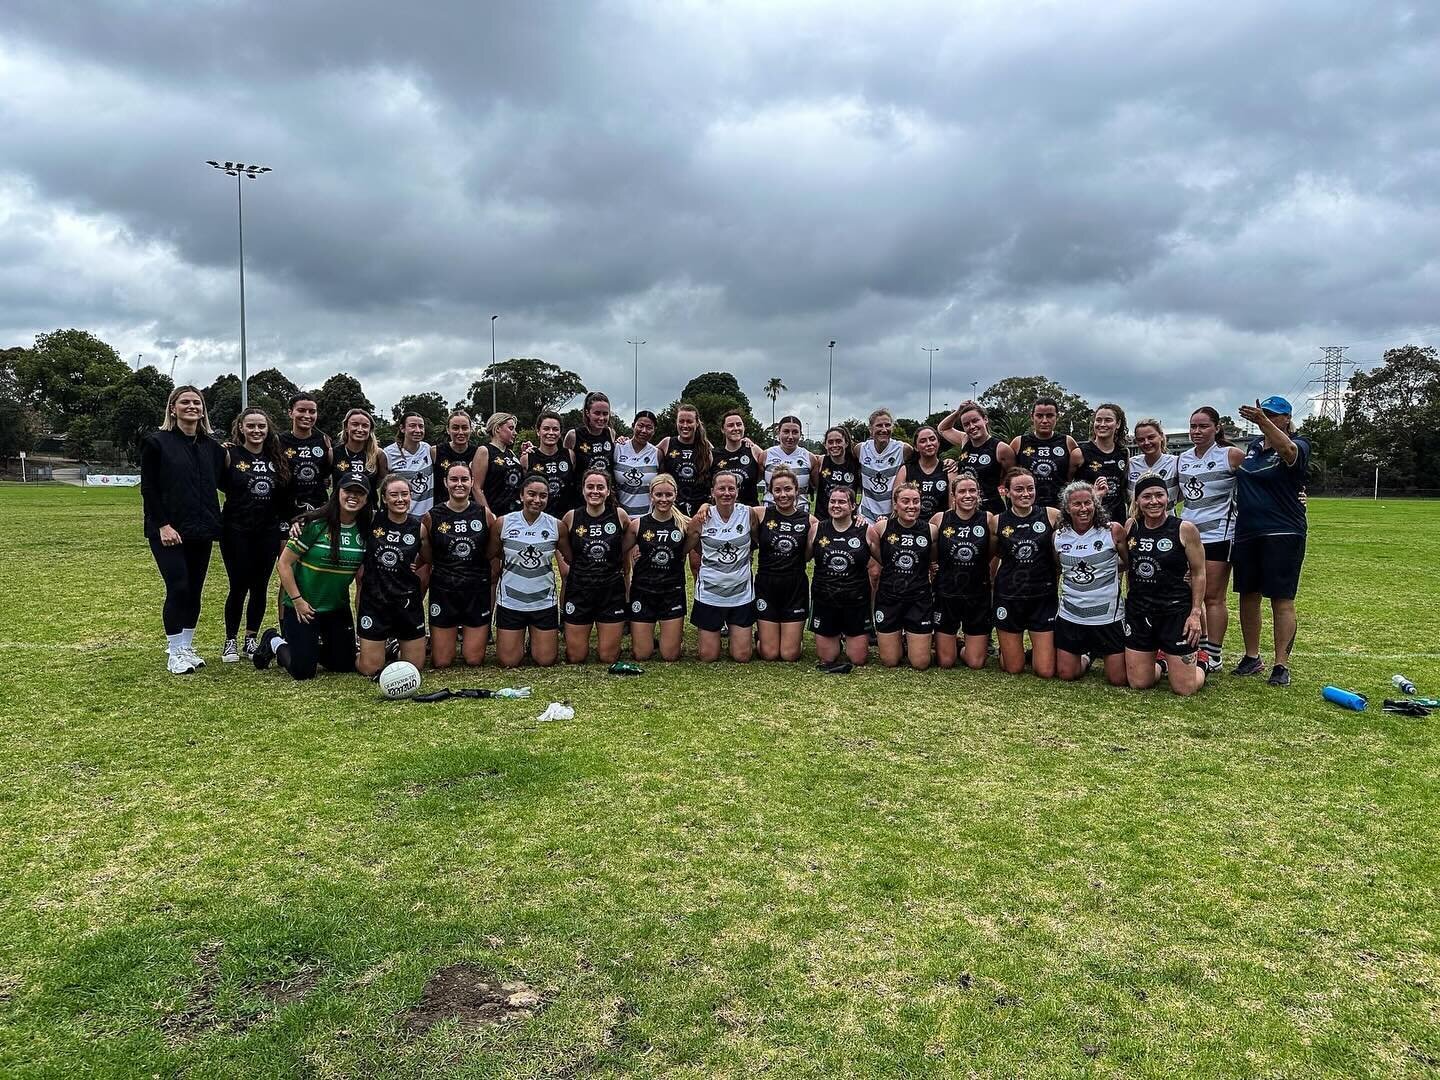 Some action shots from the past weekends games against @penrithgaelsgac 

It was a fantastic day that everyone enjoyed, hopefully next year the Inner West sides can wrap their heads around the round ball&hellip; thank you to everyone involved and tha